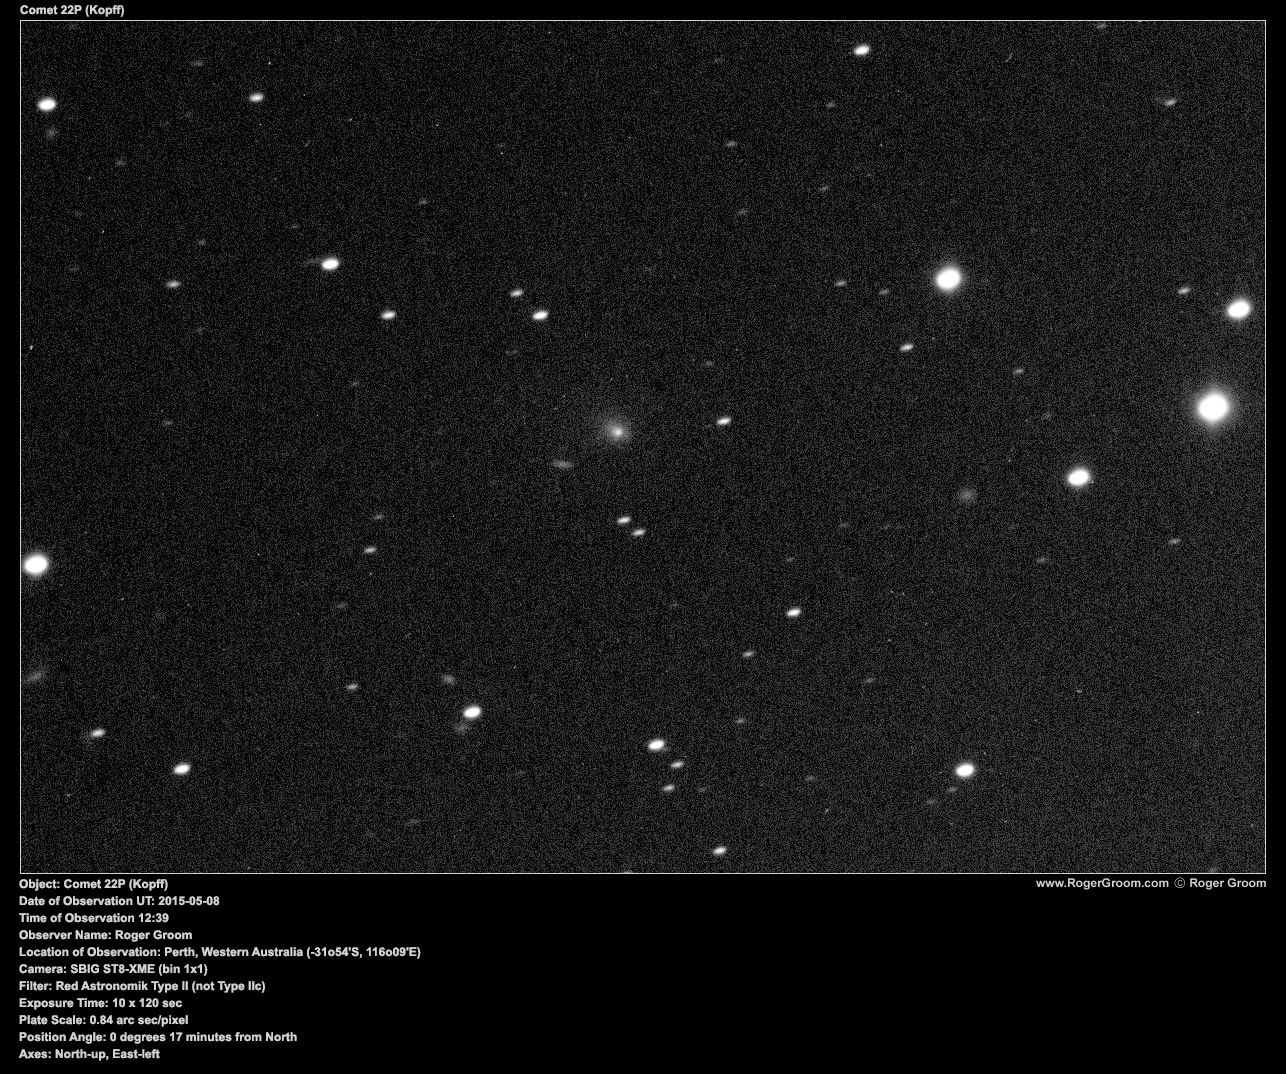 Object: Comet 22P (Kopff) Date of Observation UT: 2015-05-08 Time of Observation 12:39 Observer Name: Roger Groom Location of Observation: Perth, Western Australia (-31o54'S, 116o09'E) Camera: SBIG ST8-XME (bin 1x1) Filter: Red Astronomik Type II (not Type IIc) Exposure Time: 10 x 120 sec Plate Scale: 0.84 arc sec/pixel Position Angle: 0 degrees 17 minutes from North Axes: North-up, East-left